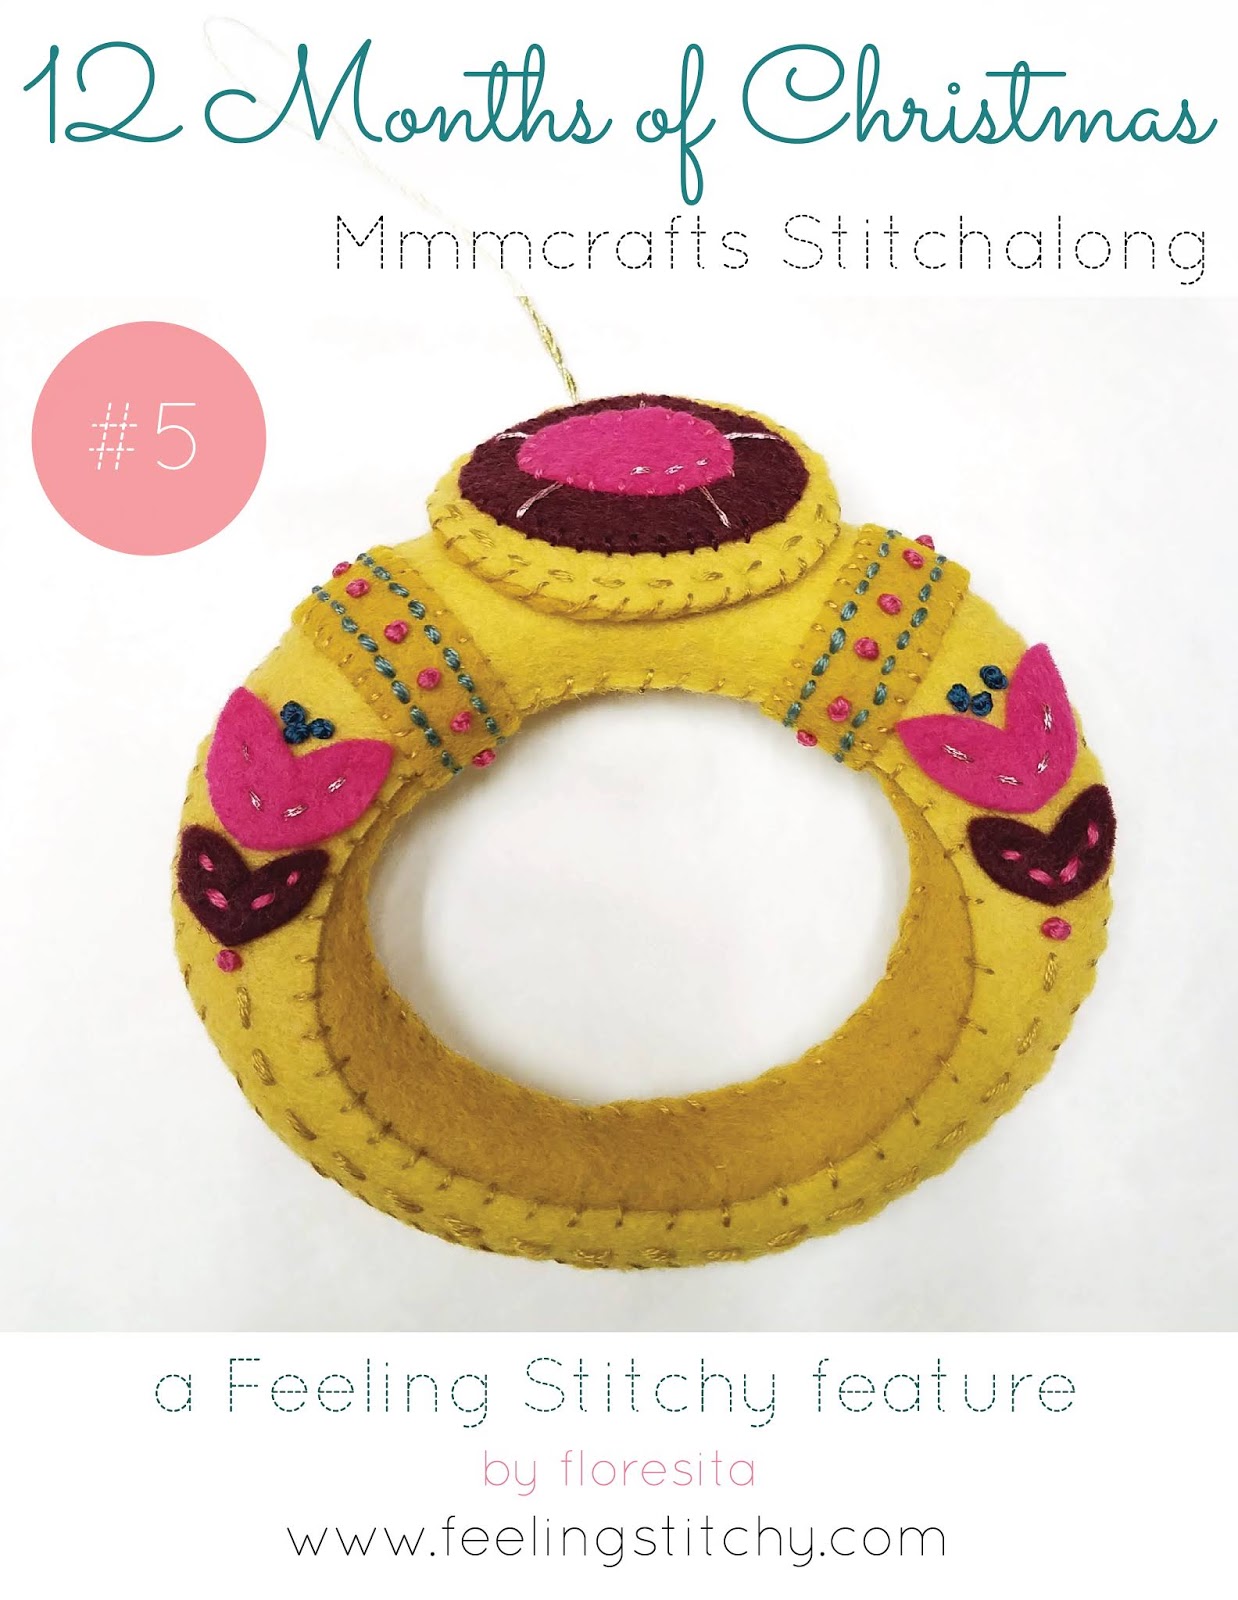 12 Months of Christmas Stitchalong Gold Ring pattern by Larissa Holland as stitched by floresita for Feeling Stitchy